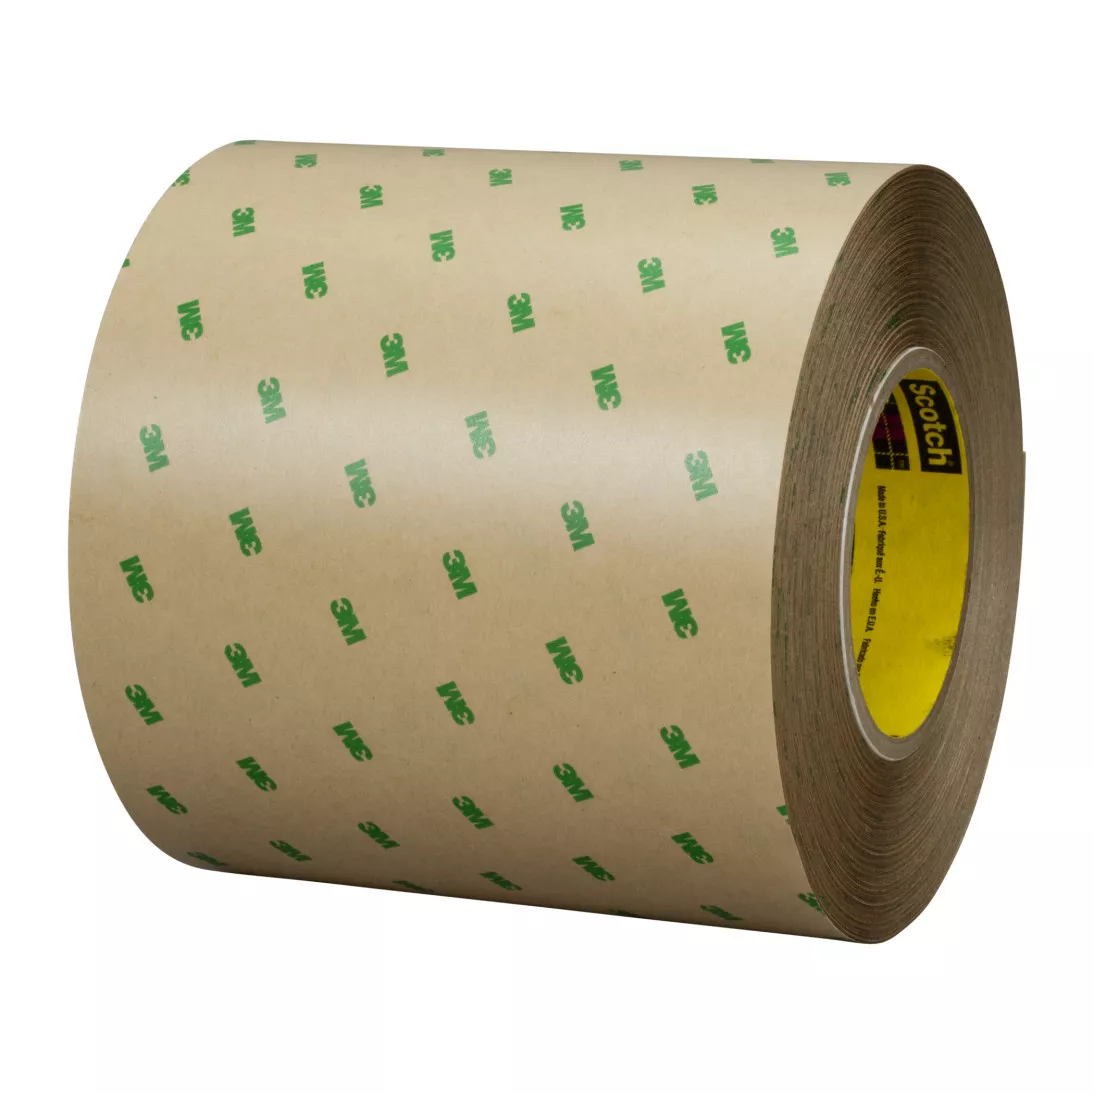 3M™ Double Coated Tape 99786NP, Translucent, 54 in x 180 yd, 5.5 mil, 1 Roll/Case